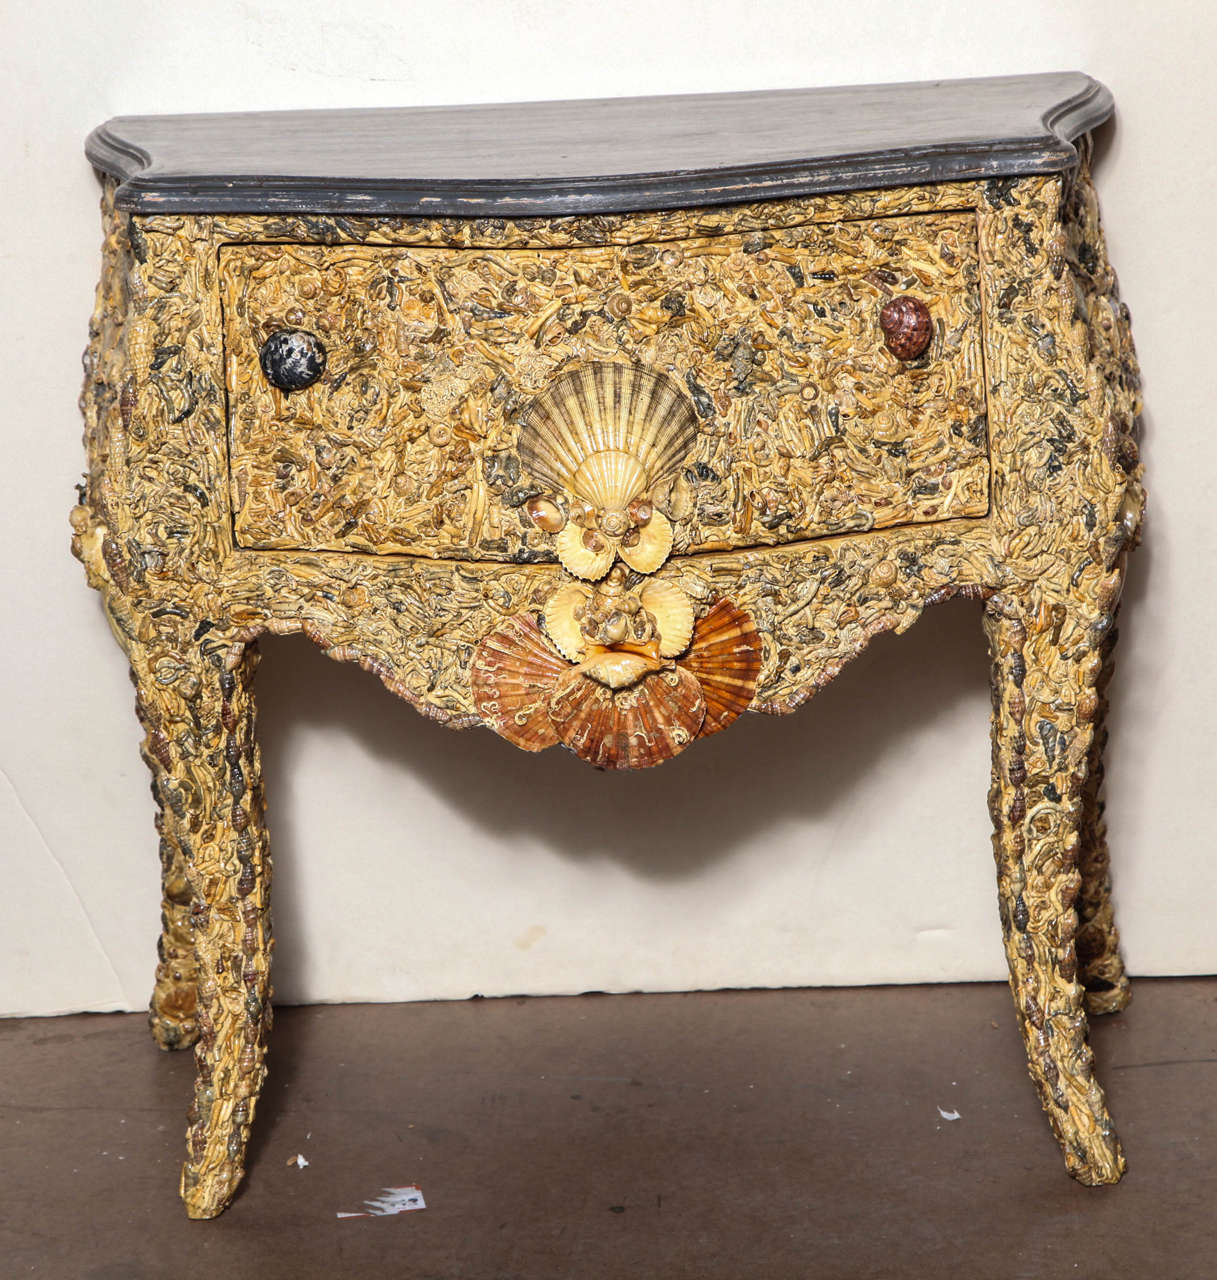 19th century Italian grotto shell commode with faux grey marble painted serpentine top over a drawer with shell pulls; on inward curving legs. Signed 